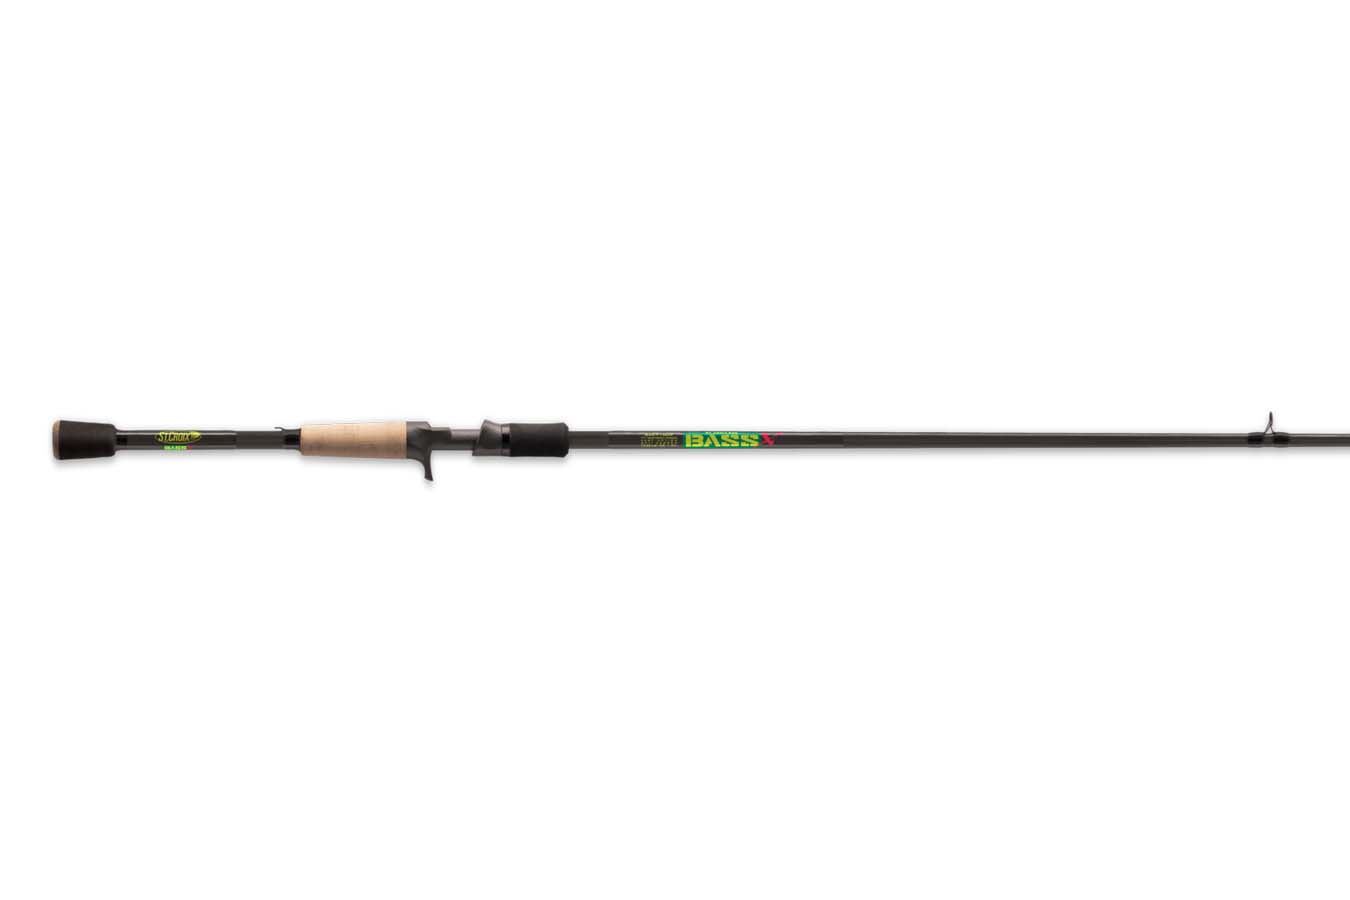 Discount St Croix Bass X 7ft 1in Casting Rod M for Sale